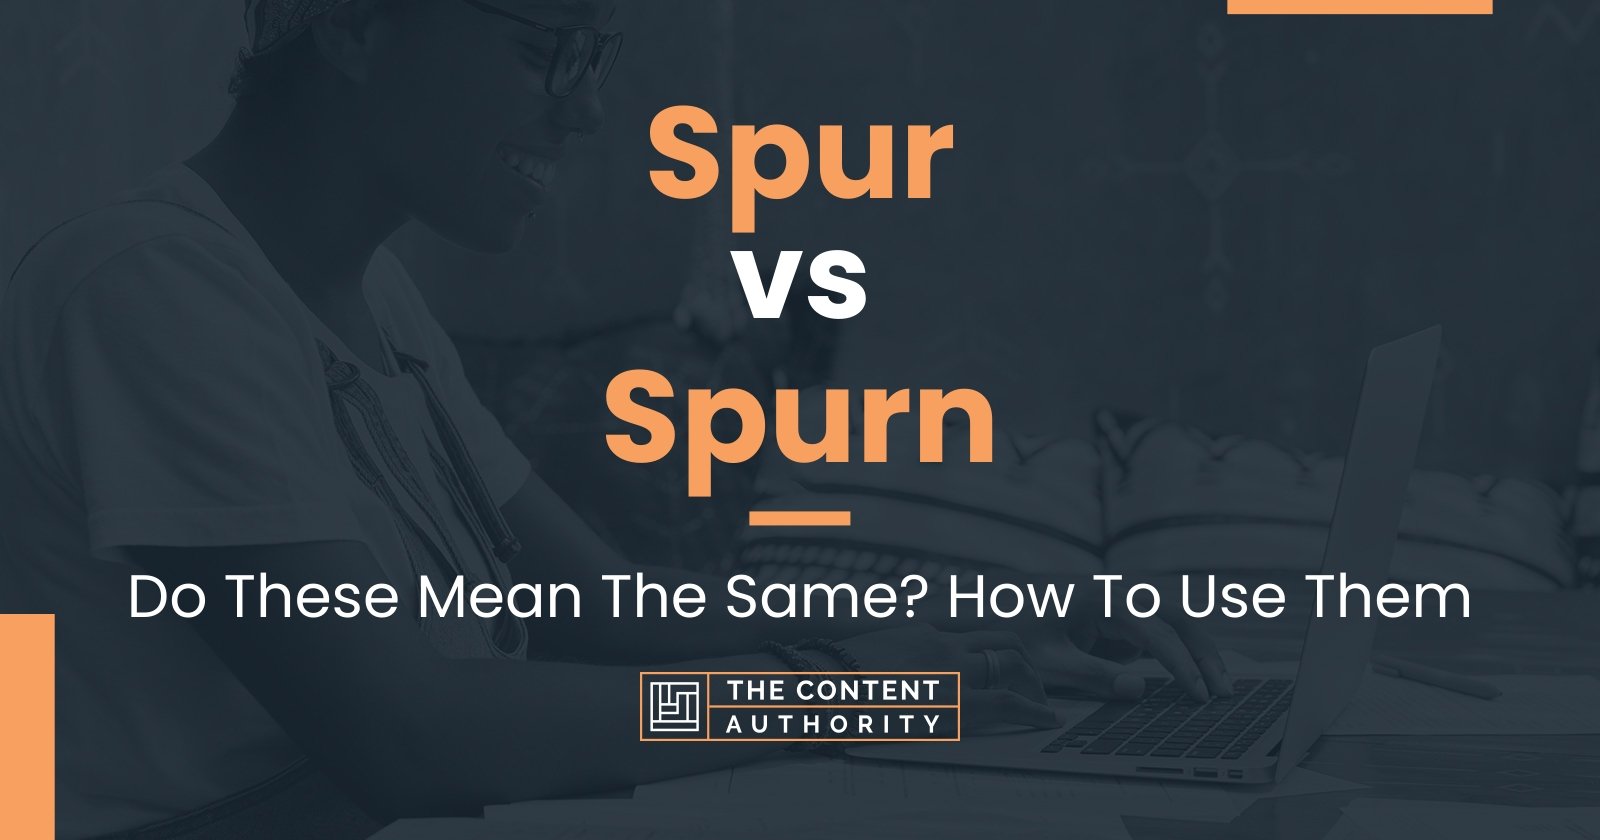 Spur vs Spurn: Do These Mean The Same? How To Use Them